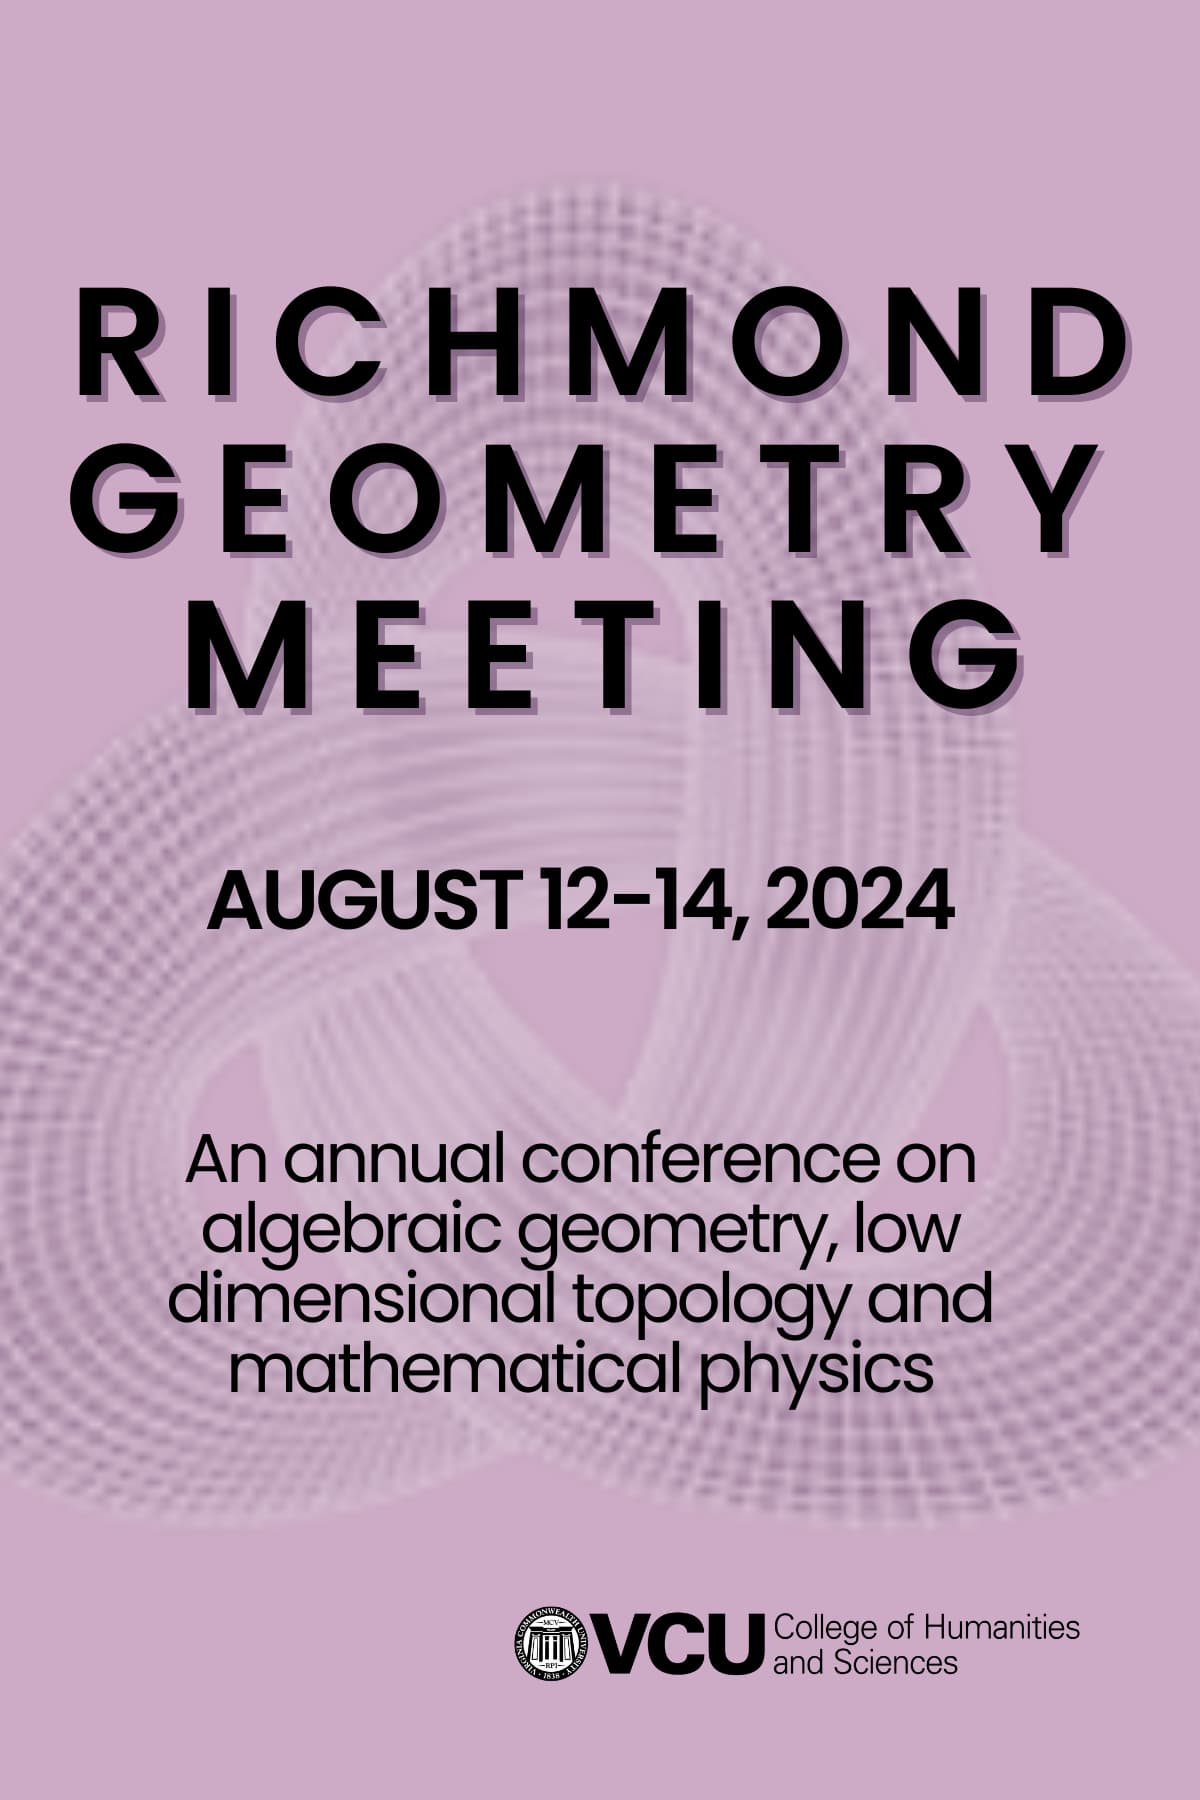 Richmond Geometry Meeting, August 12-14. Background is light purple and pink with texturized knot.